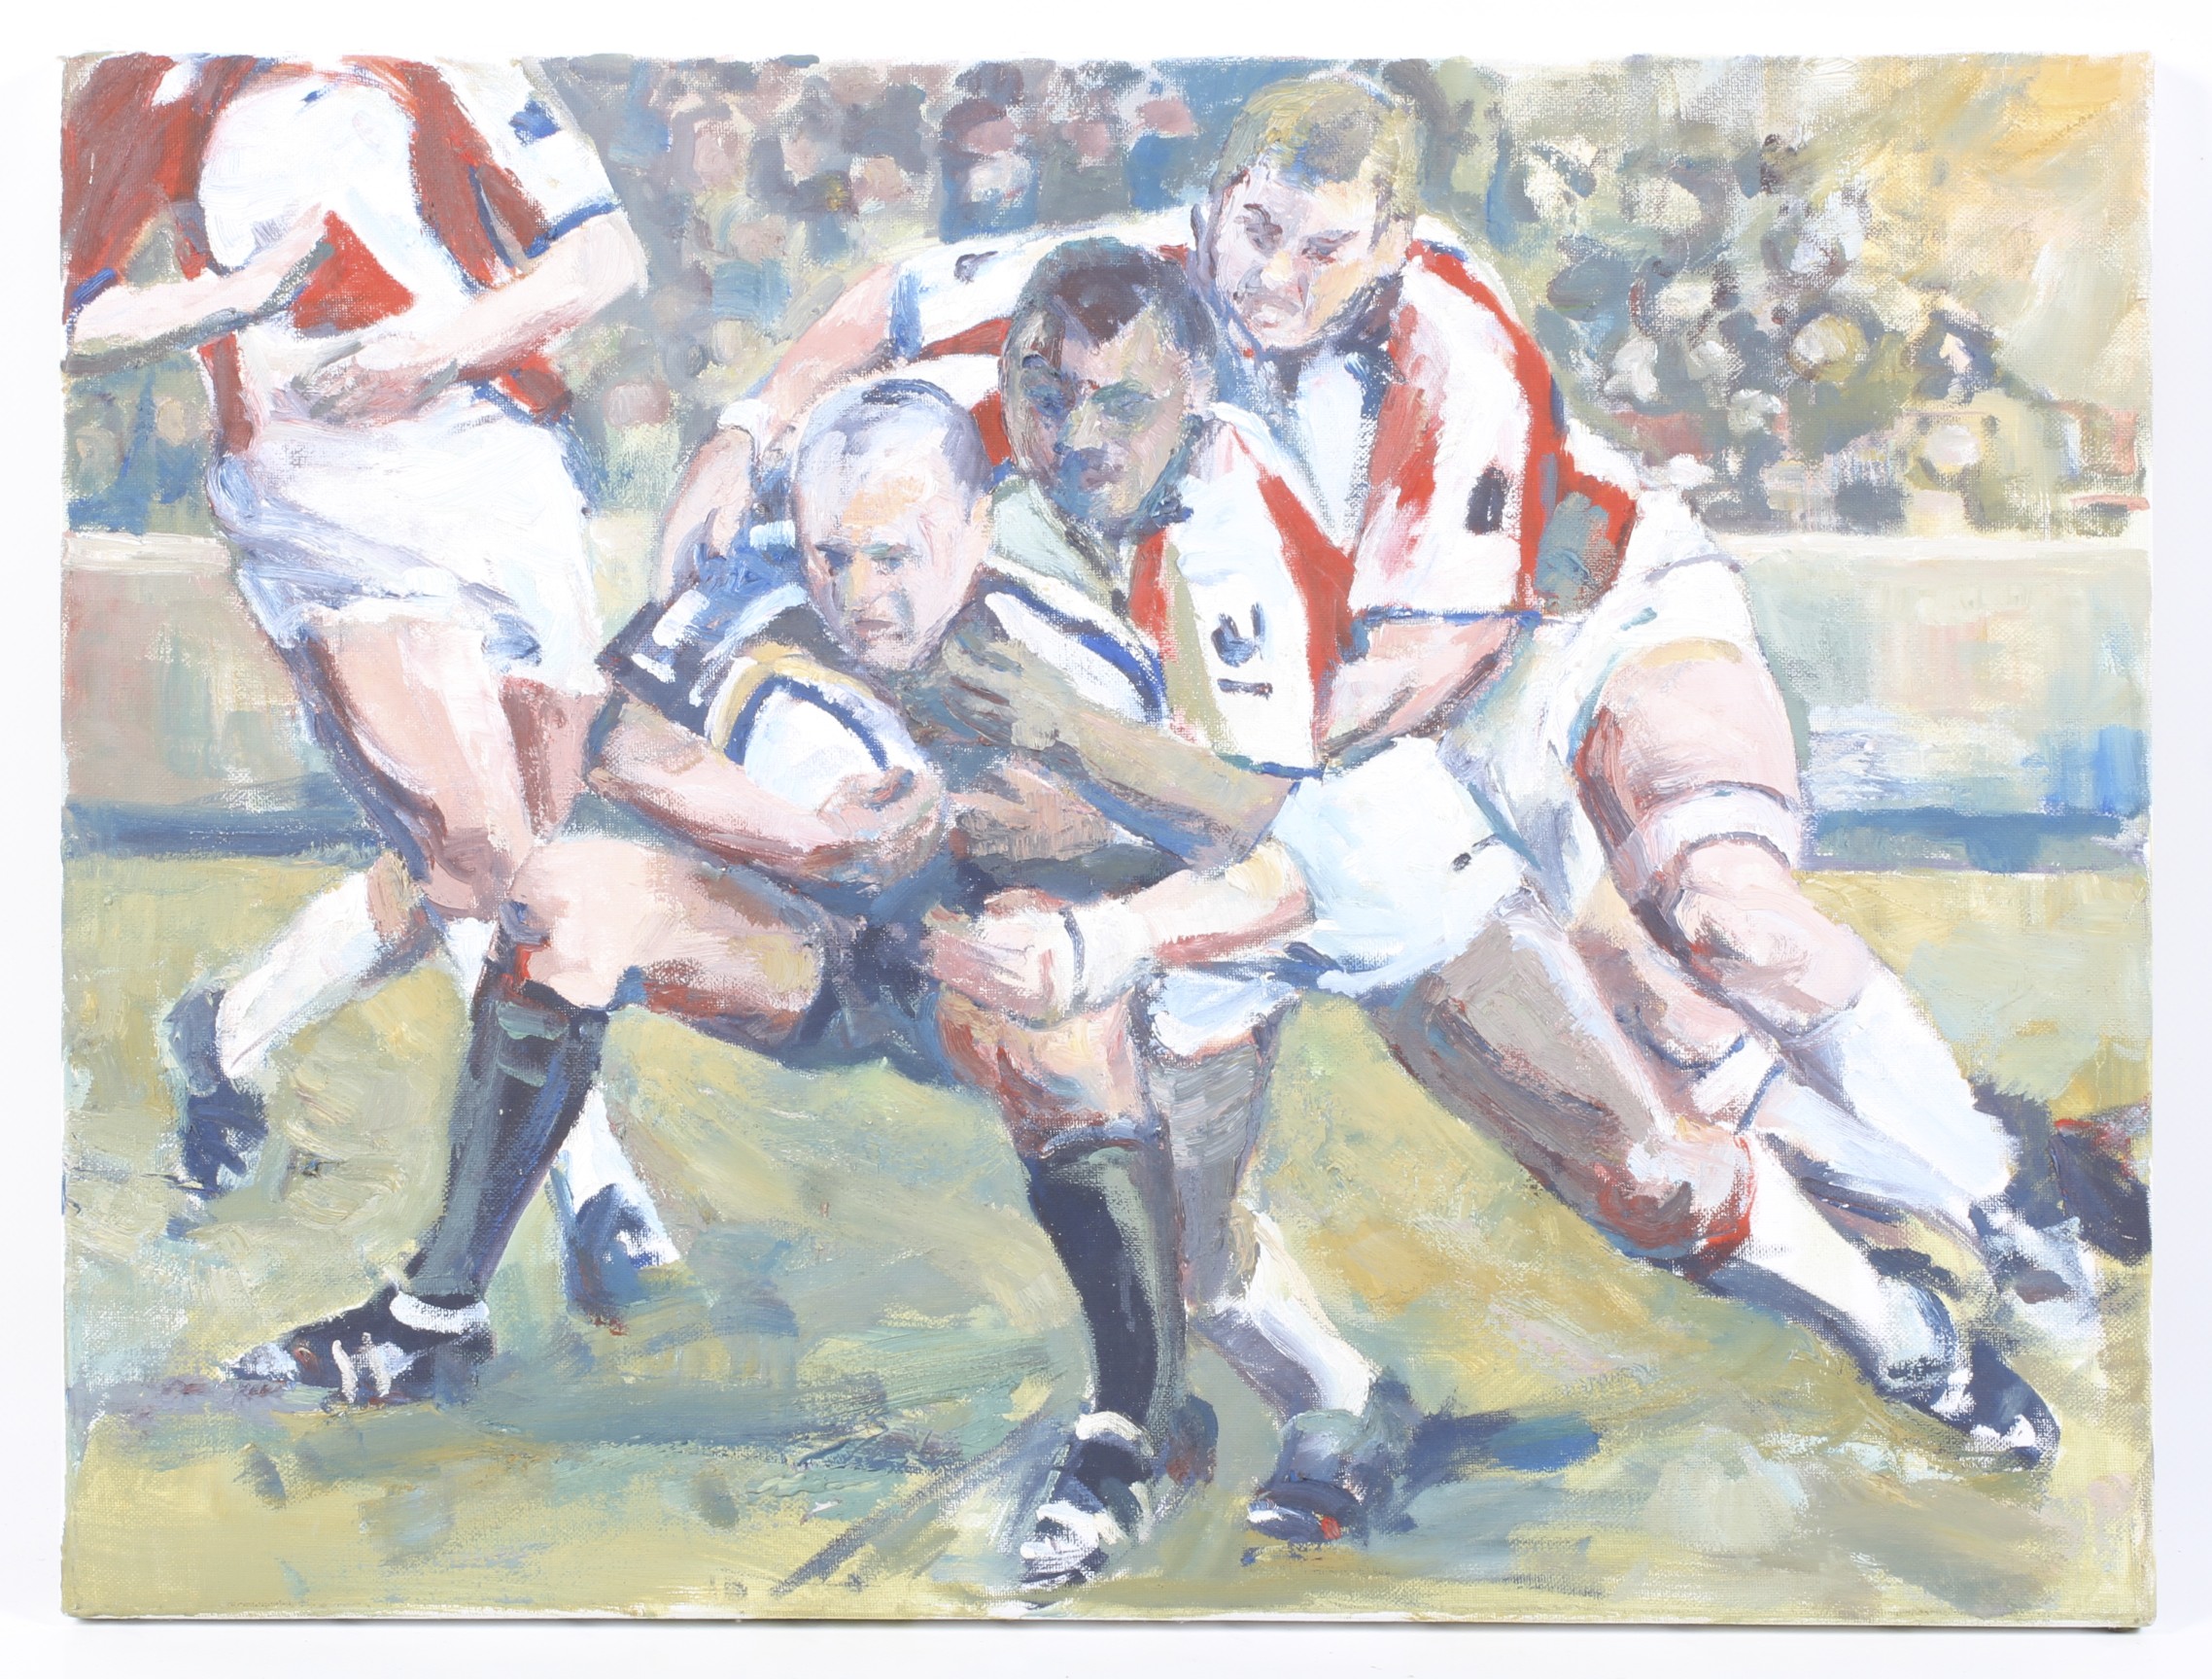 Jenifer Shearn, 20th century, oil on canvas painting of a rugby match,